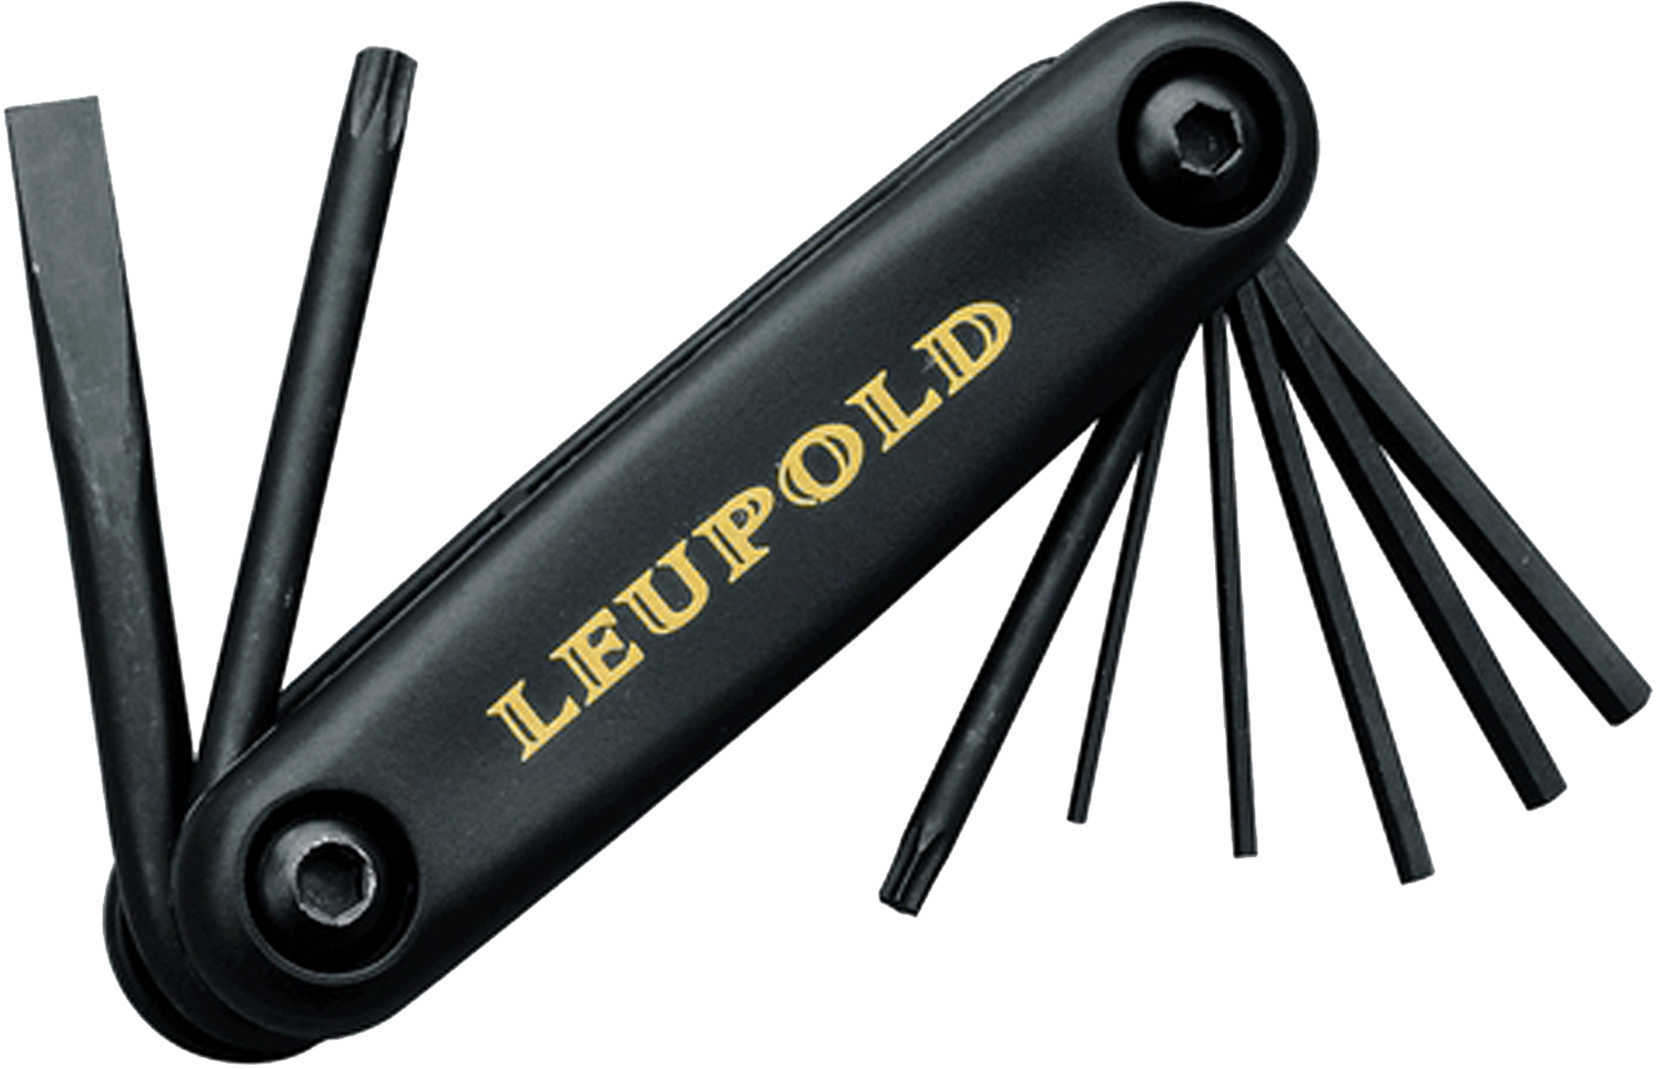 Leupold ScopeSmith Mounting Tool - Brand New In Package